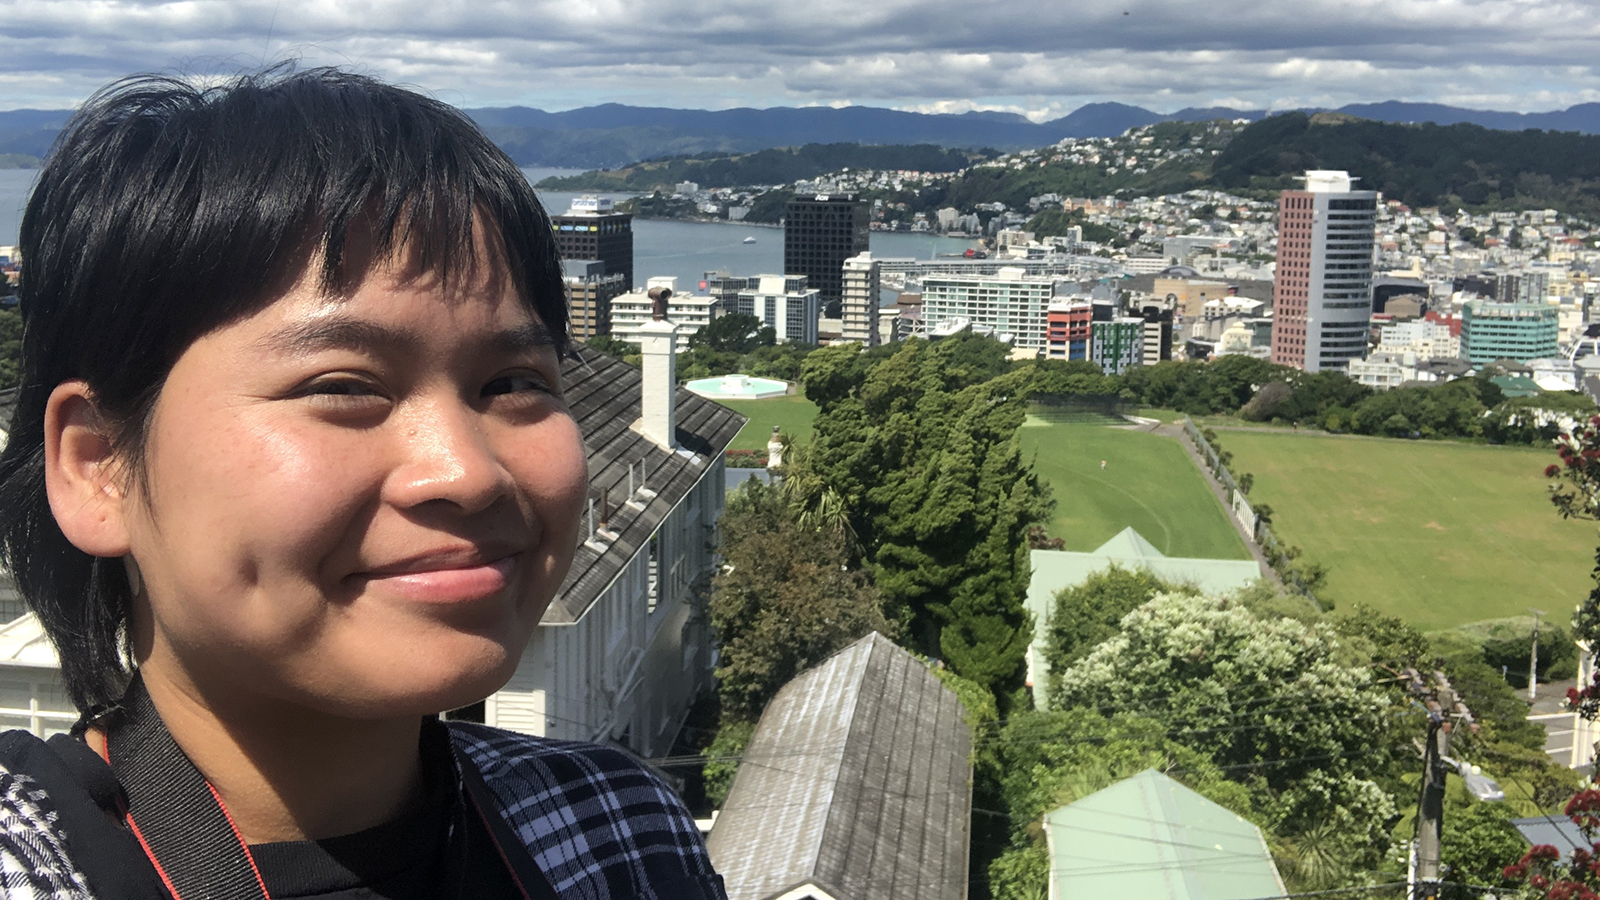 Lay Wah smiles for a selfie above a city in the background